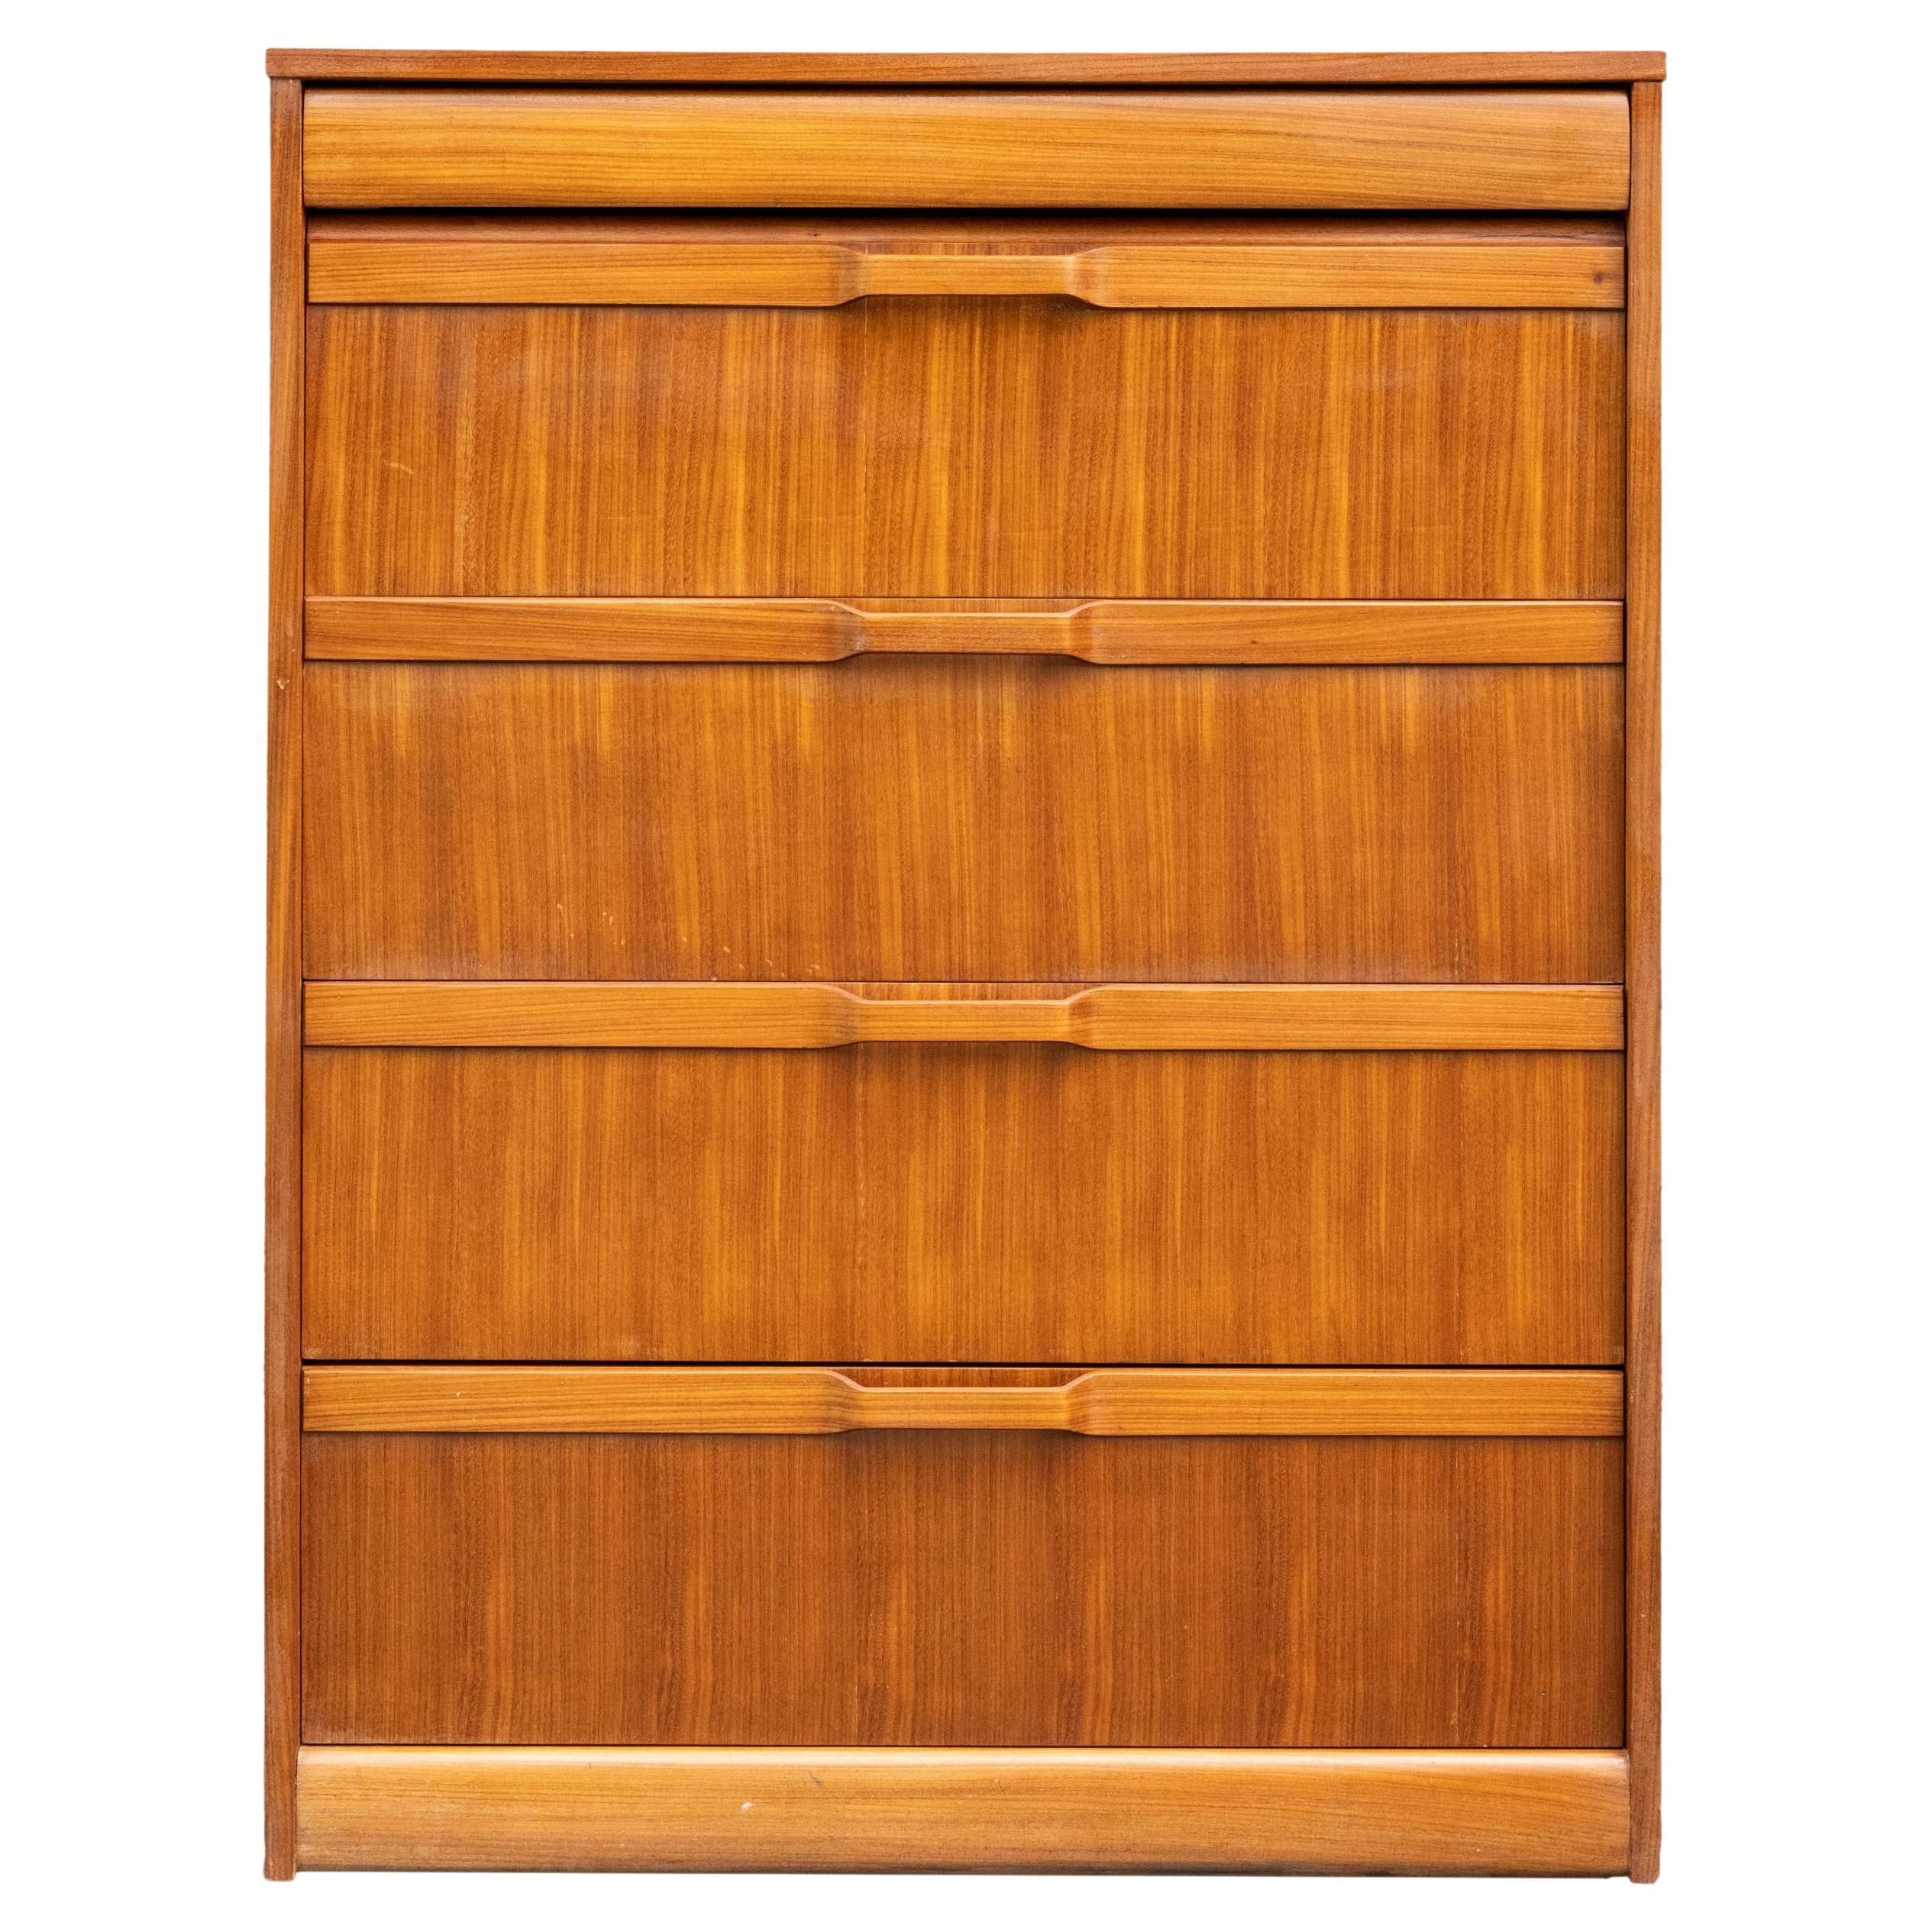 Mid-Century Modern Teak and Elm Chest-of-Drawers, Danish, Dated 1971 For Sale